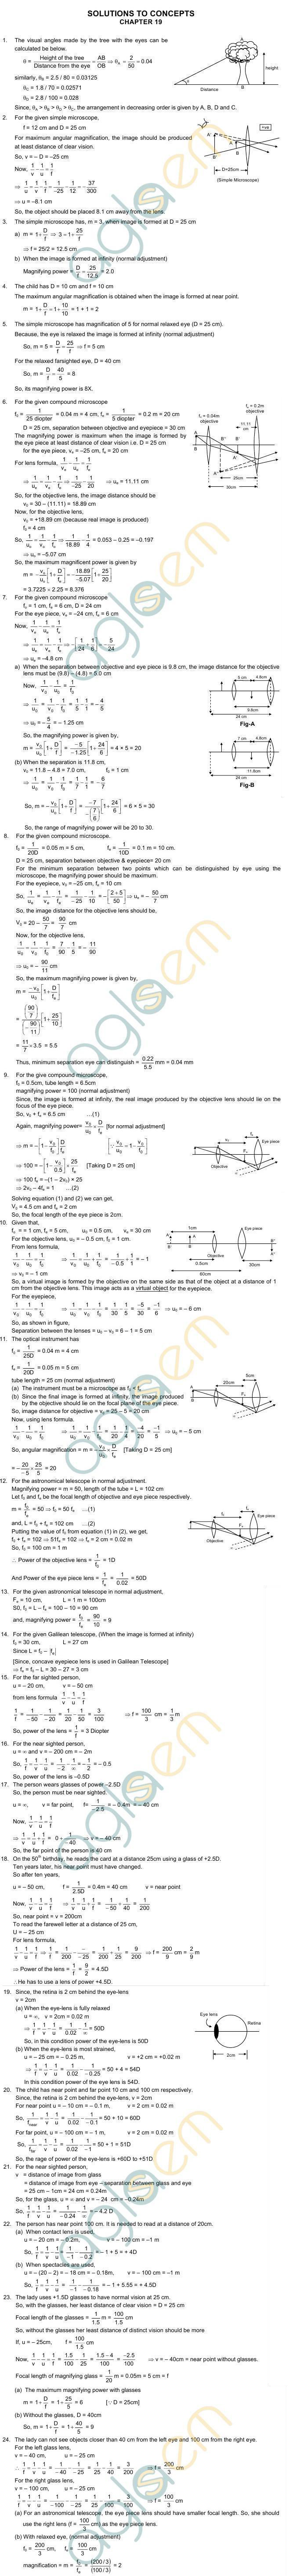 HC Verma Solutions: Chapter 19 - Optical Instruments